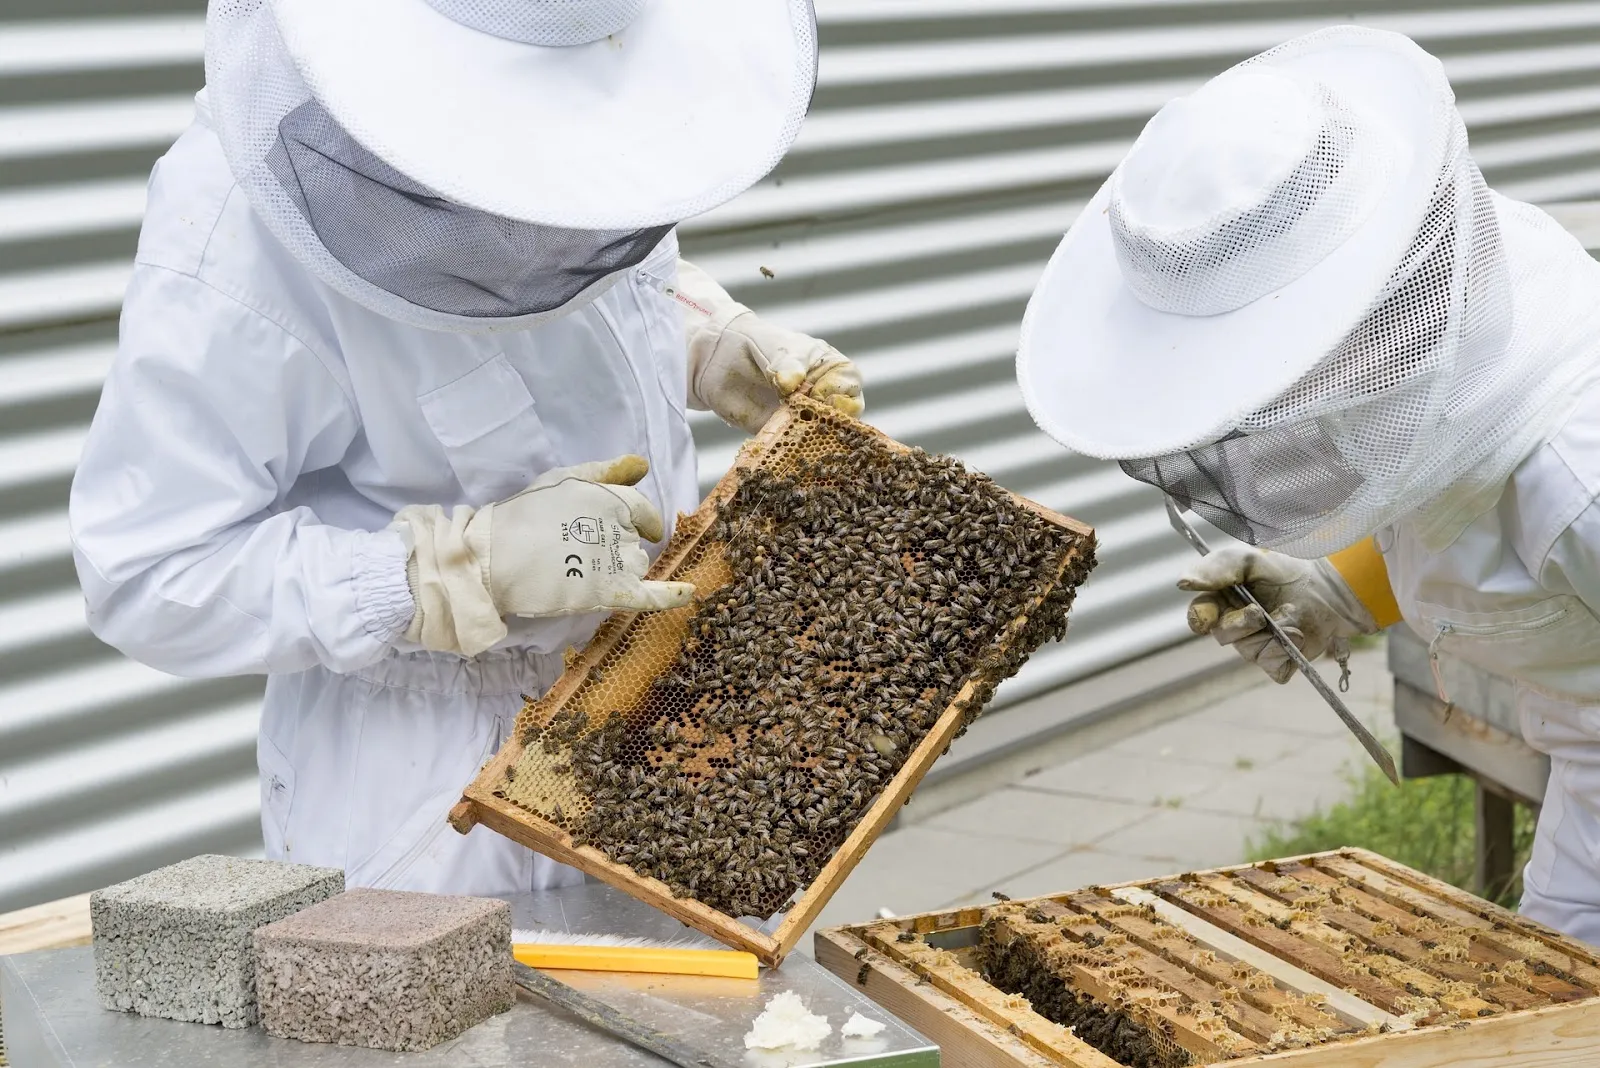 When should you not inspect a beehive?